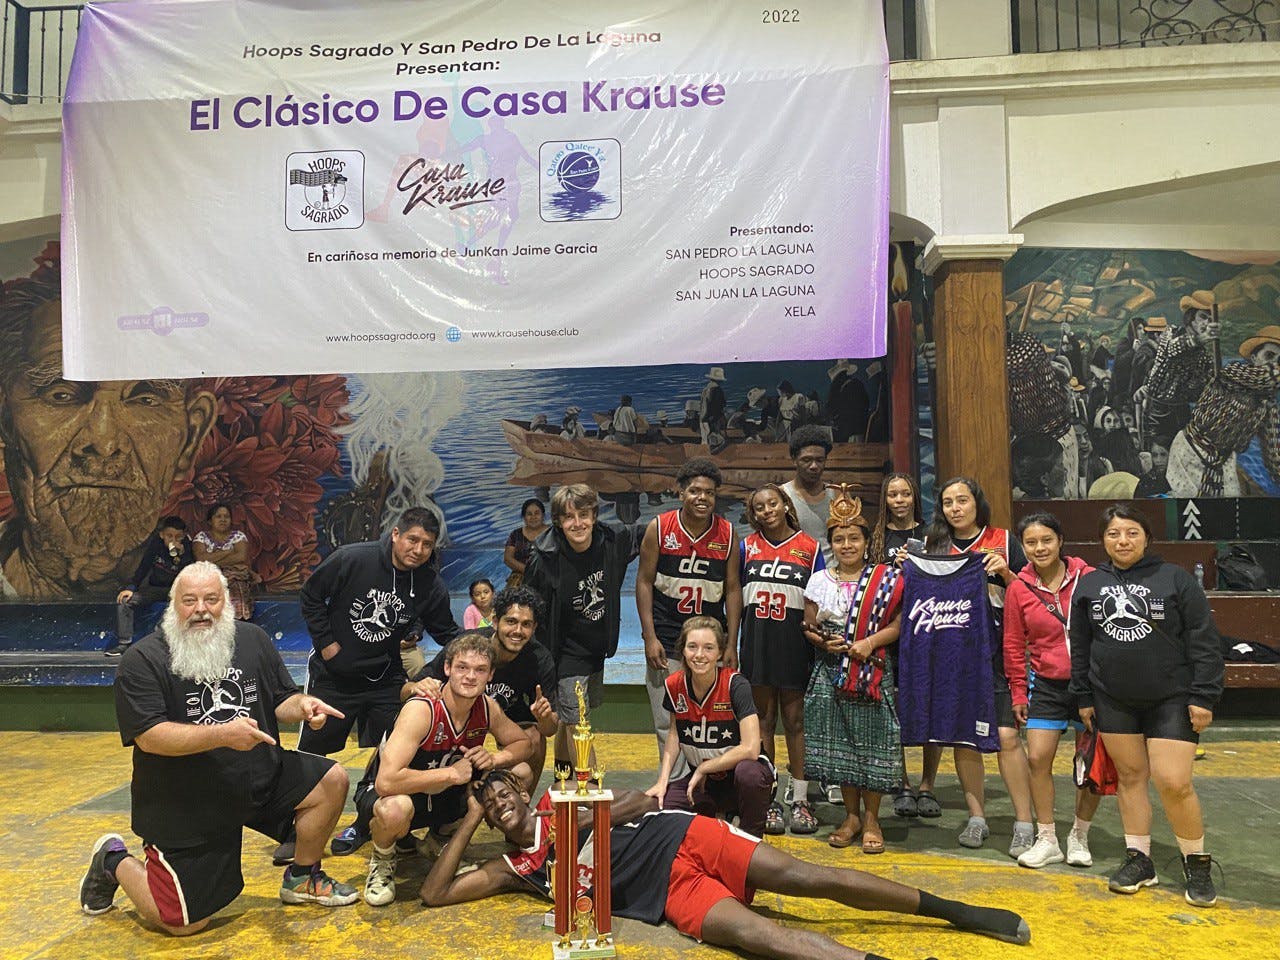 “Besides a constant buzz all weekend from international competition, Hoops Sagrado’s tourney with @KrauseHouseDAO allowed the players & coaches to experience Mayan traditions & ceremonies. The cultural paths that basketball can open up, globally, are endless! @JerrysDigest”  Josh Phelps